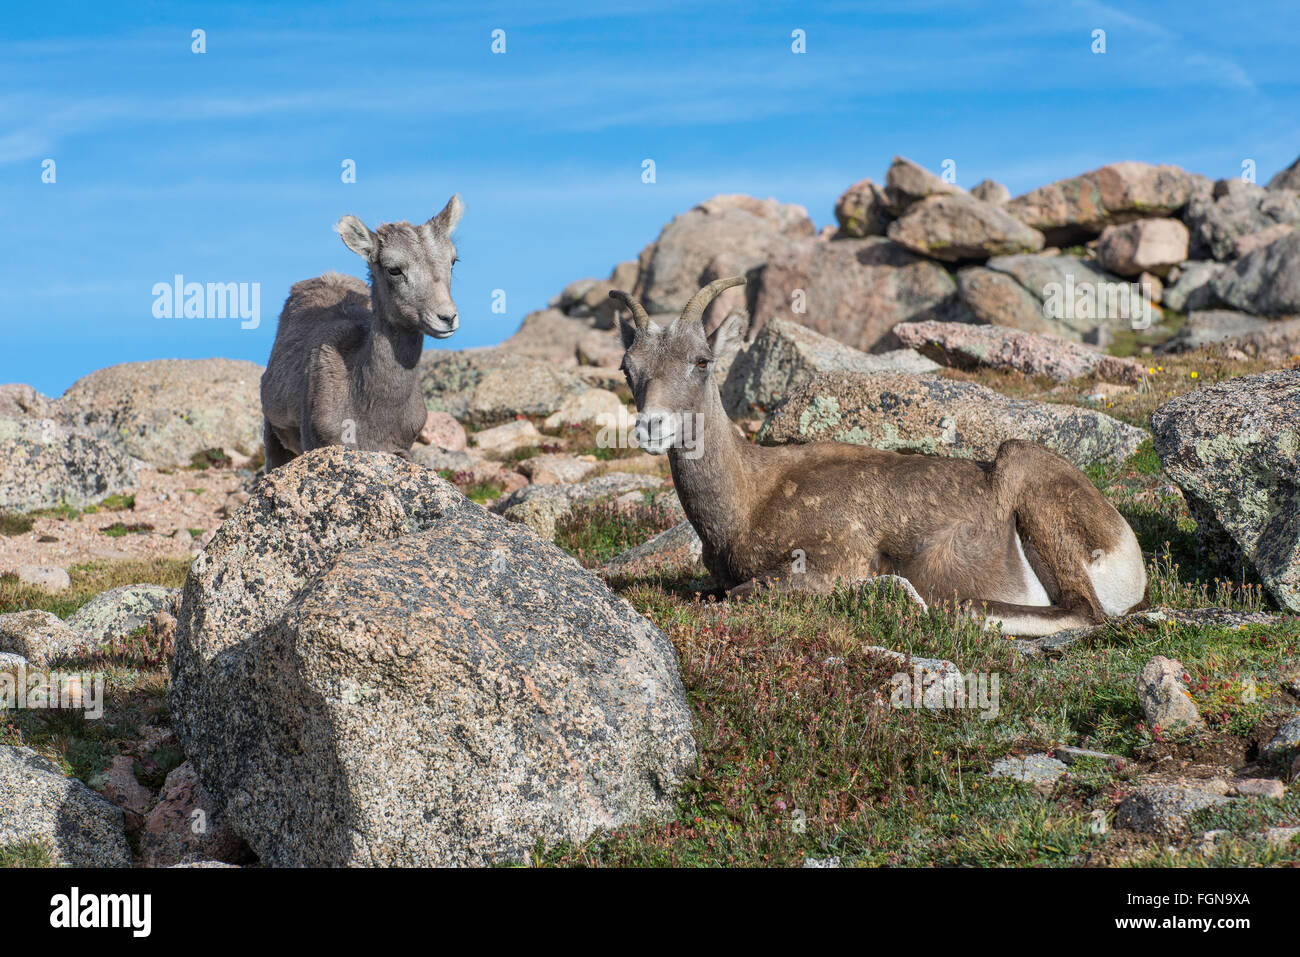 Bighorn Sheep (Ovis canadensis) Ewe and Lamb resting, Mount Evans Wilderness Area, Rocky Mountains, Colorado USA Stock Photo